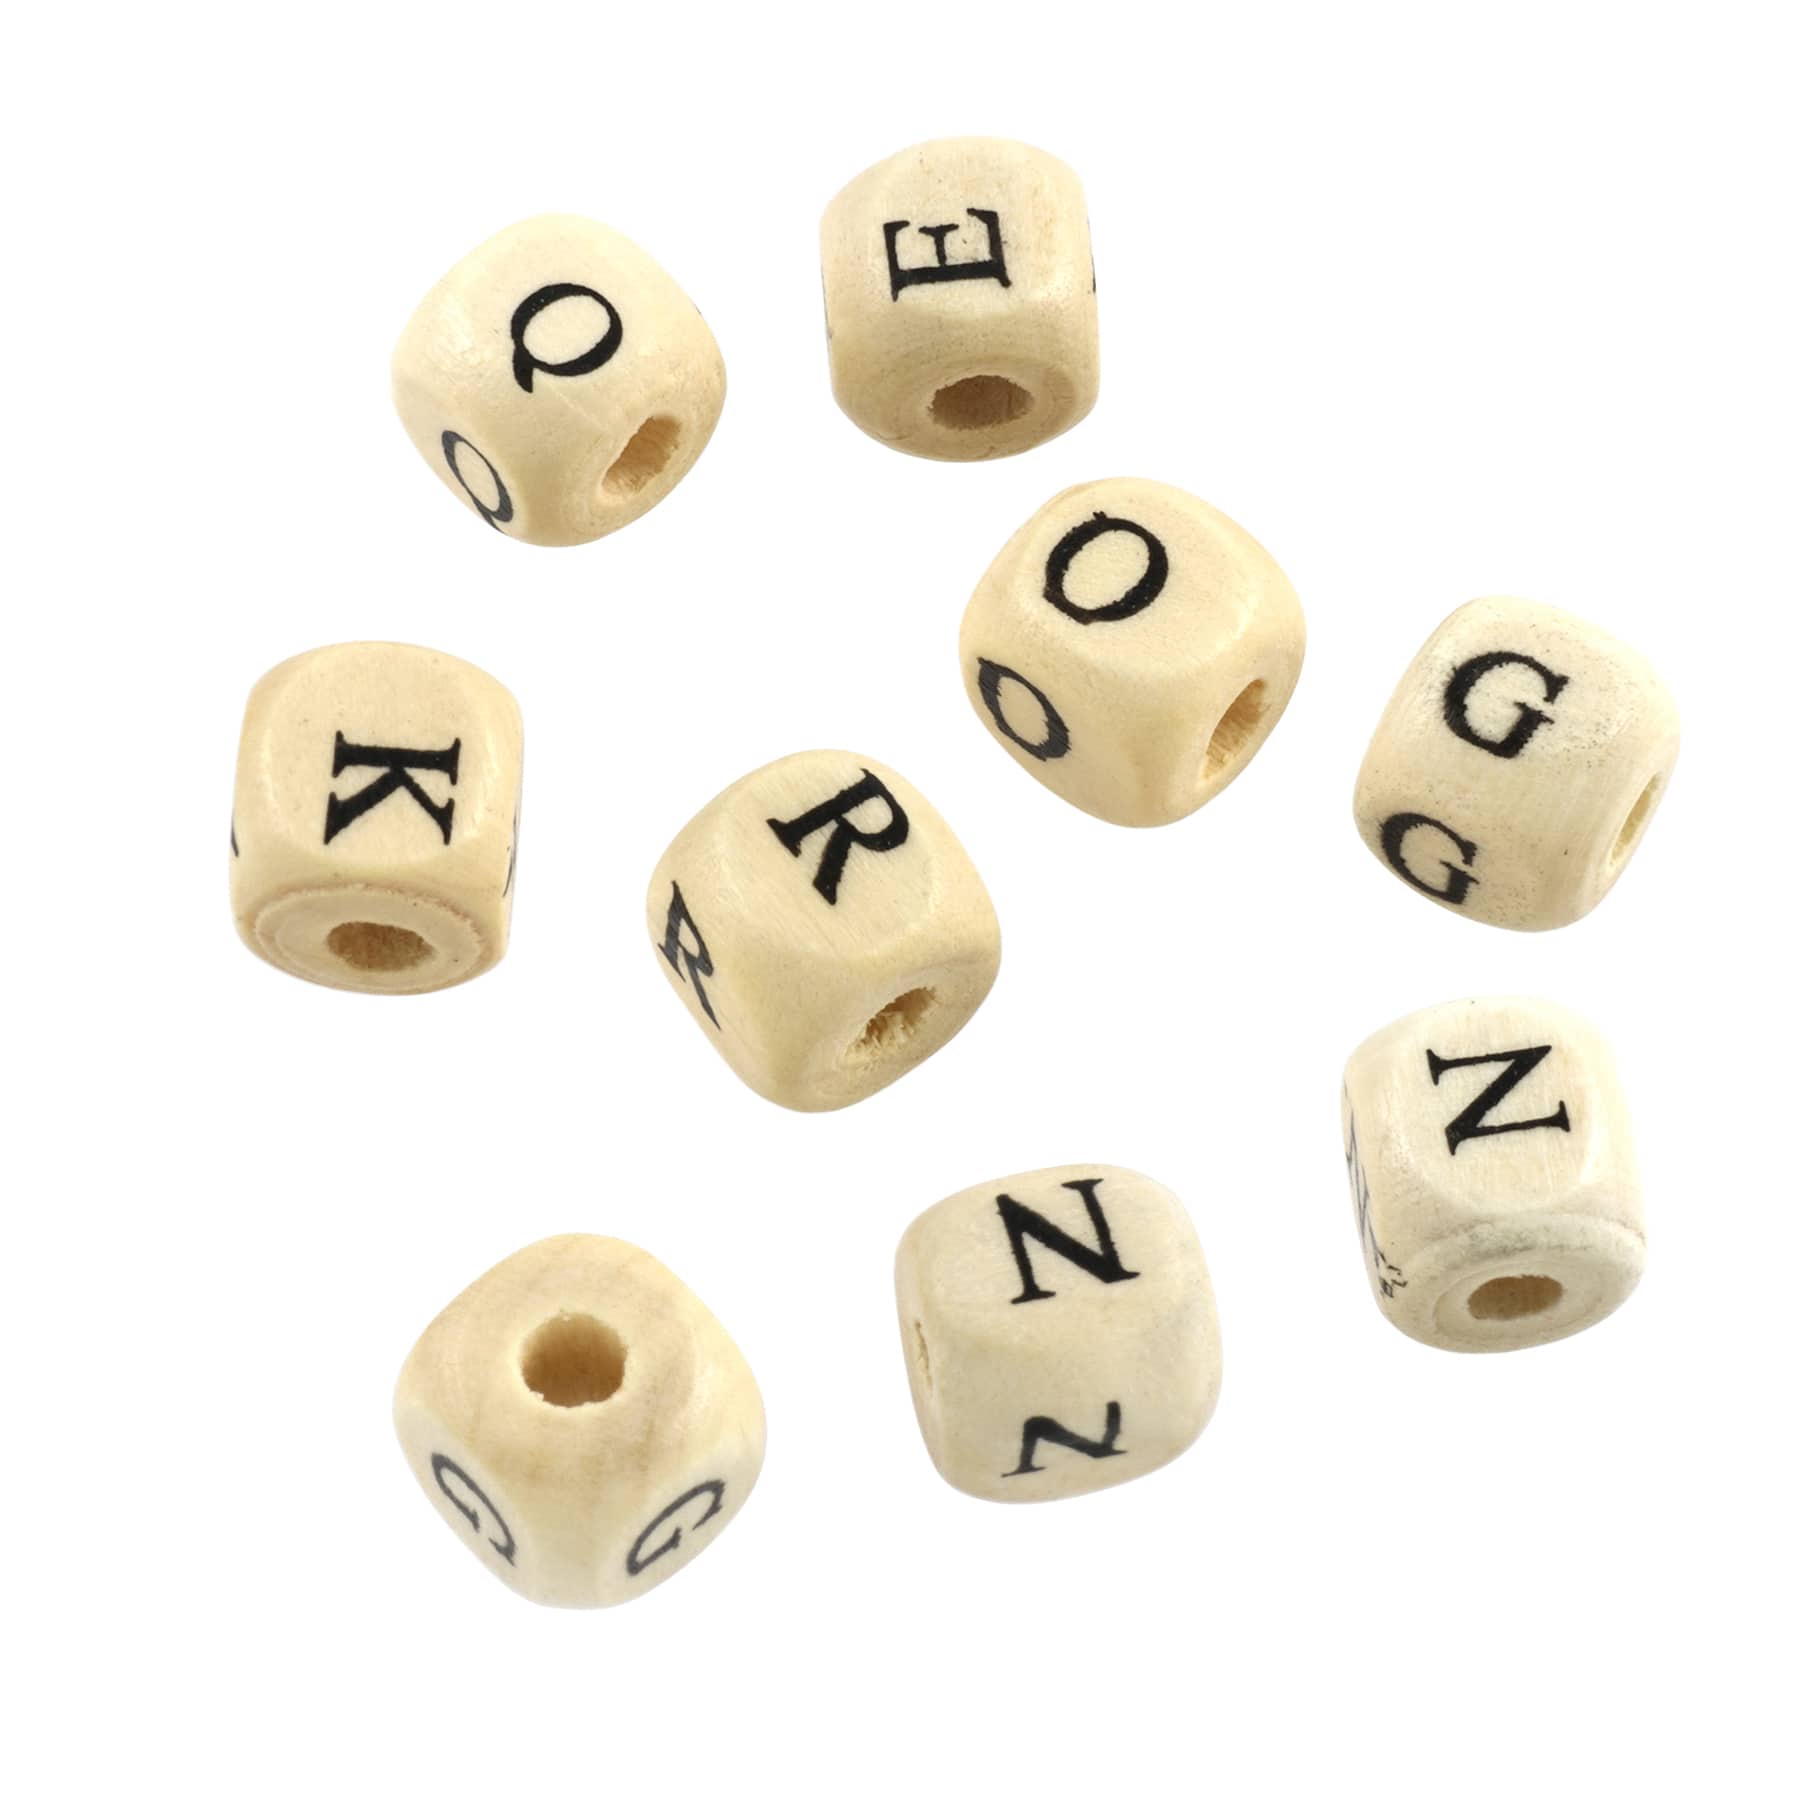 Wood Alphabet Letter Beads / Big Wooden Cube Initial Bead / Square Bea, MiniatureSweet, Kawaii Resin Crafts, Decoden Cabochons Supplies